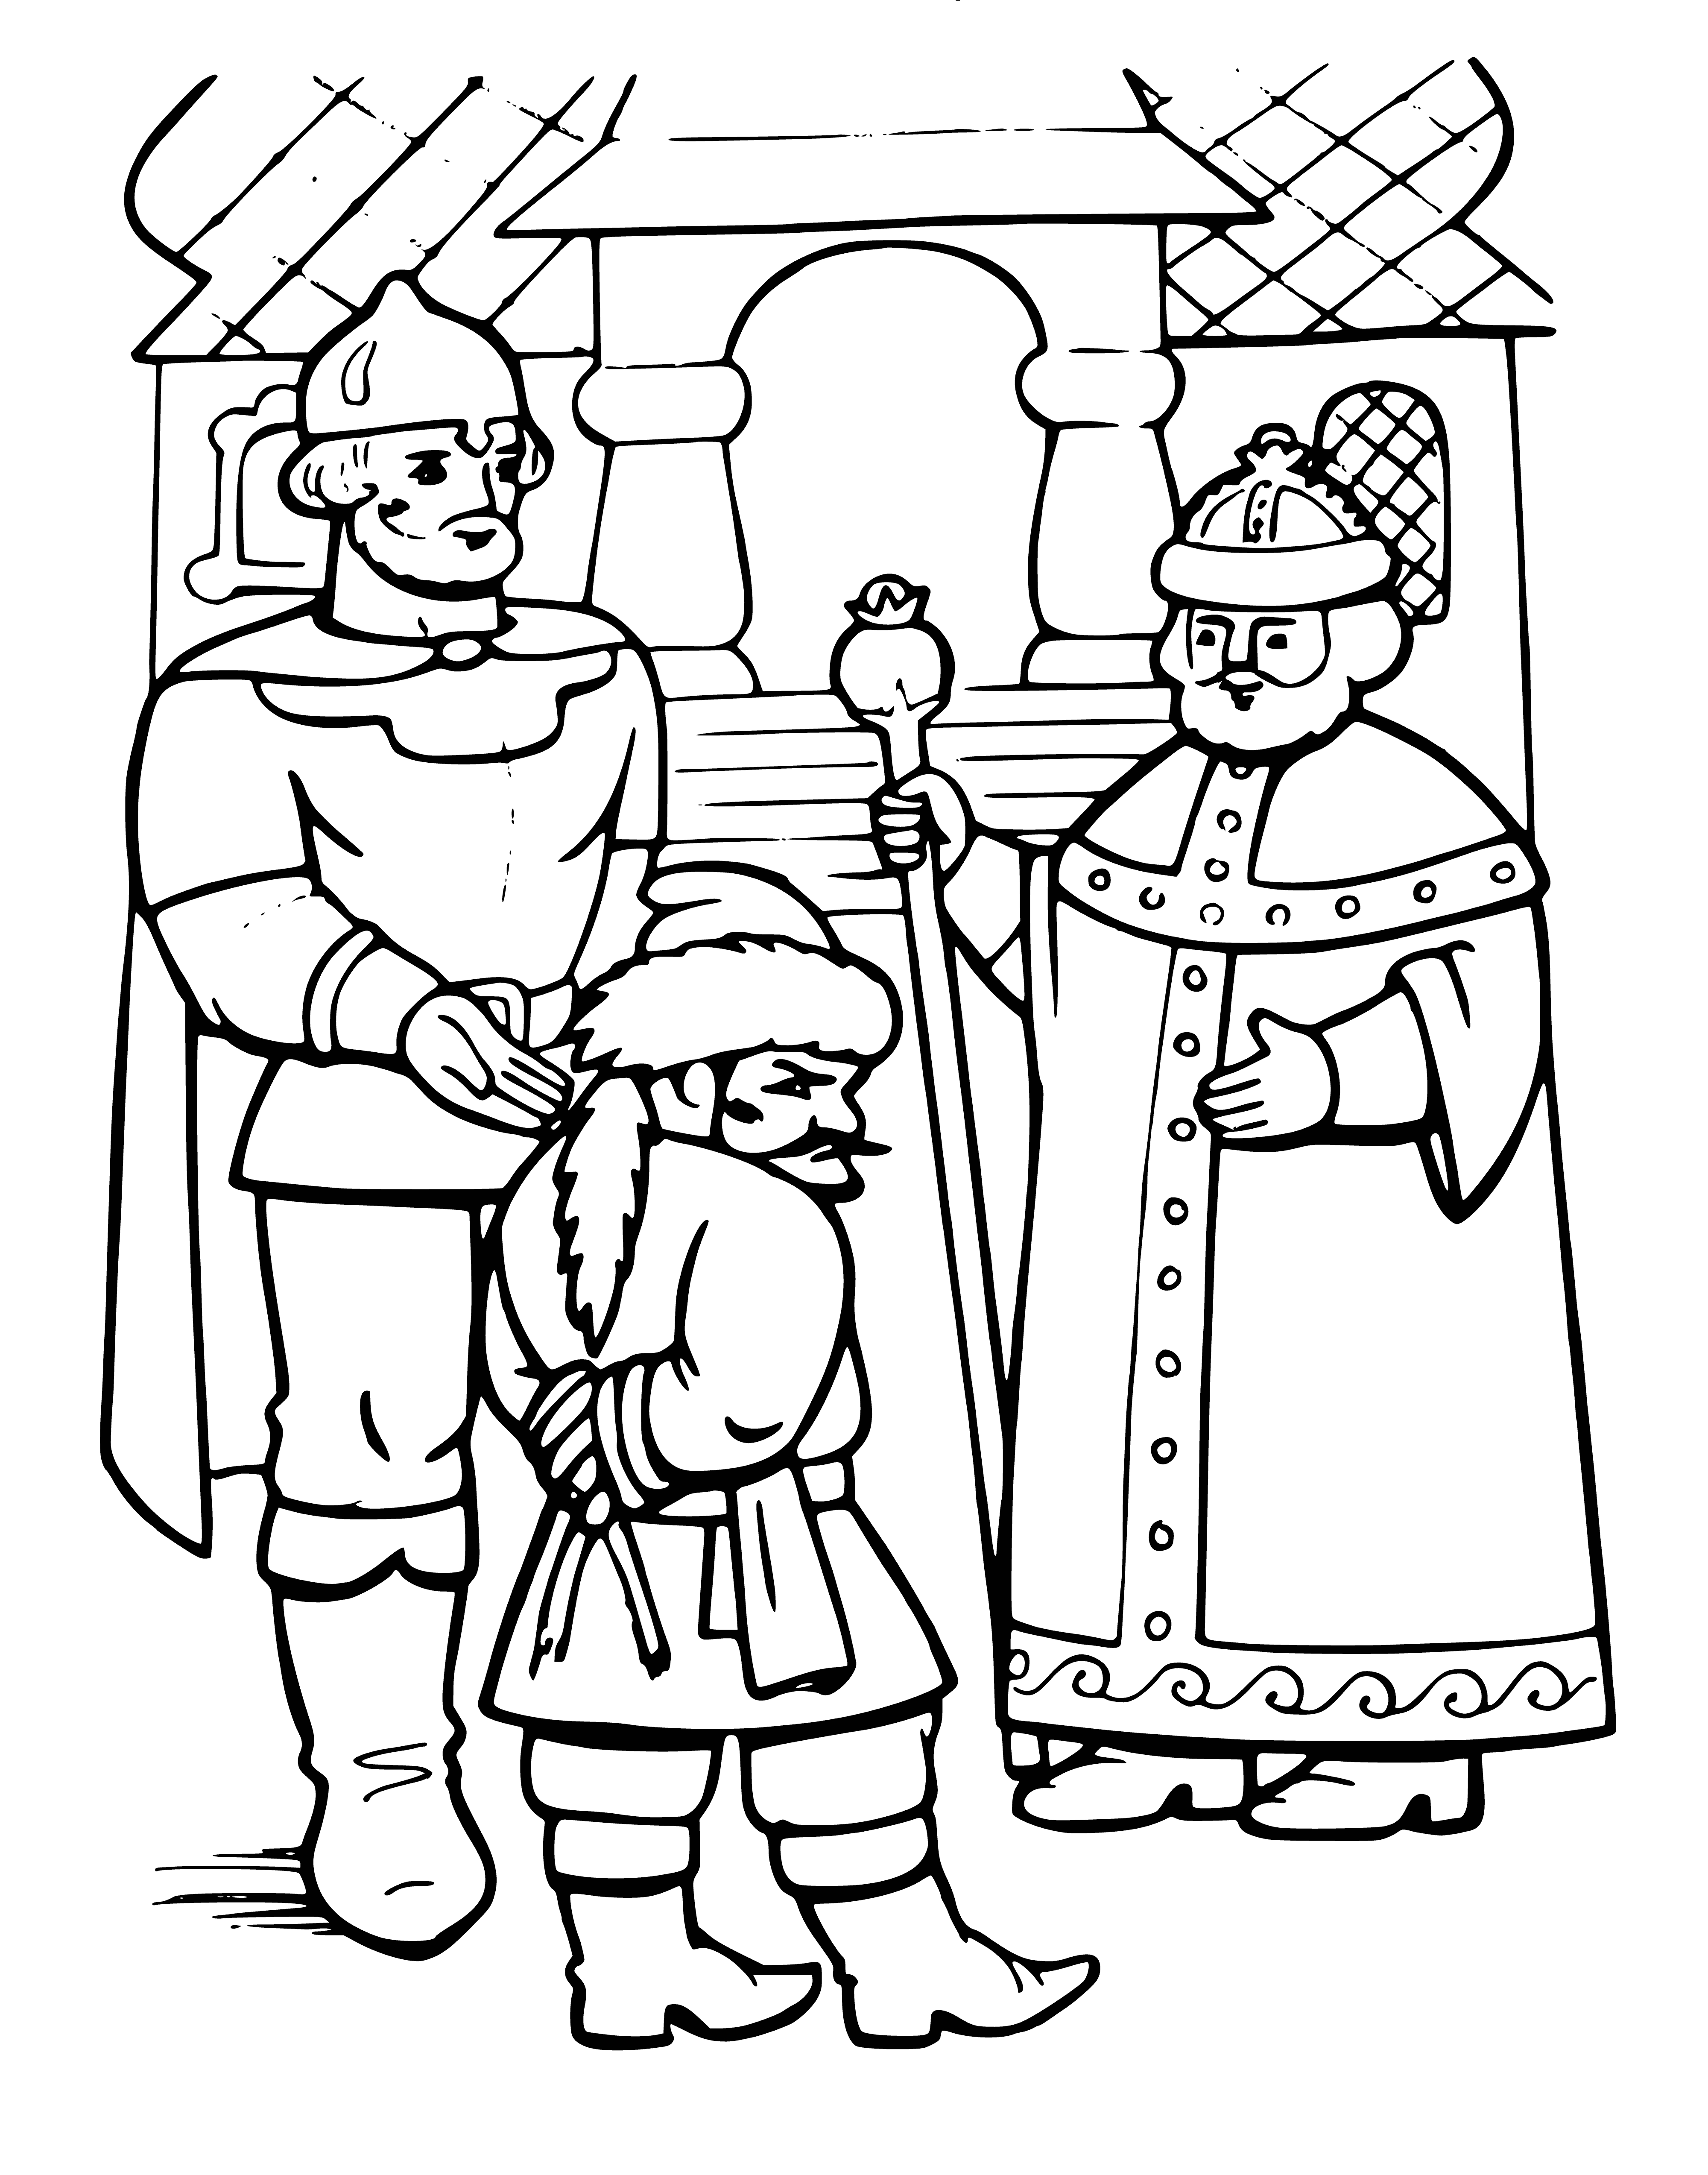 Brought the Nightingale to the king coloring page